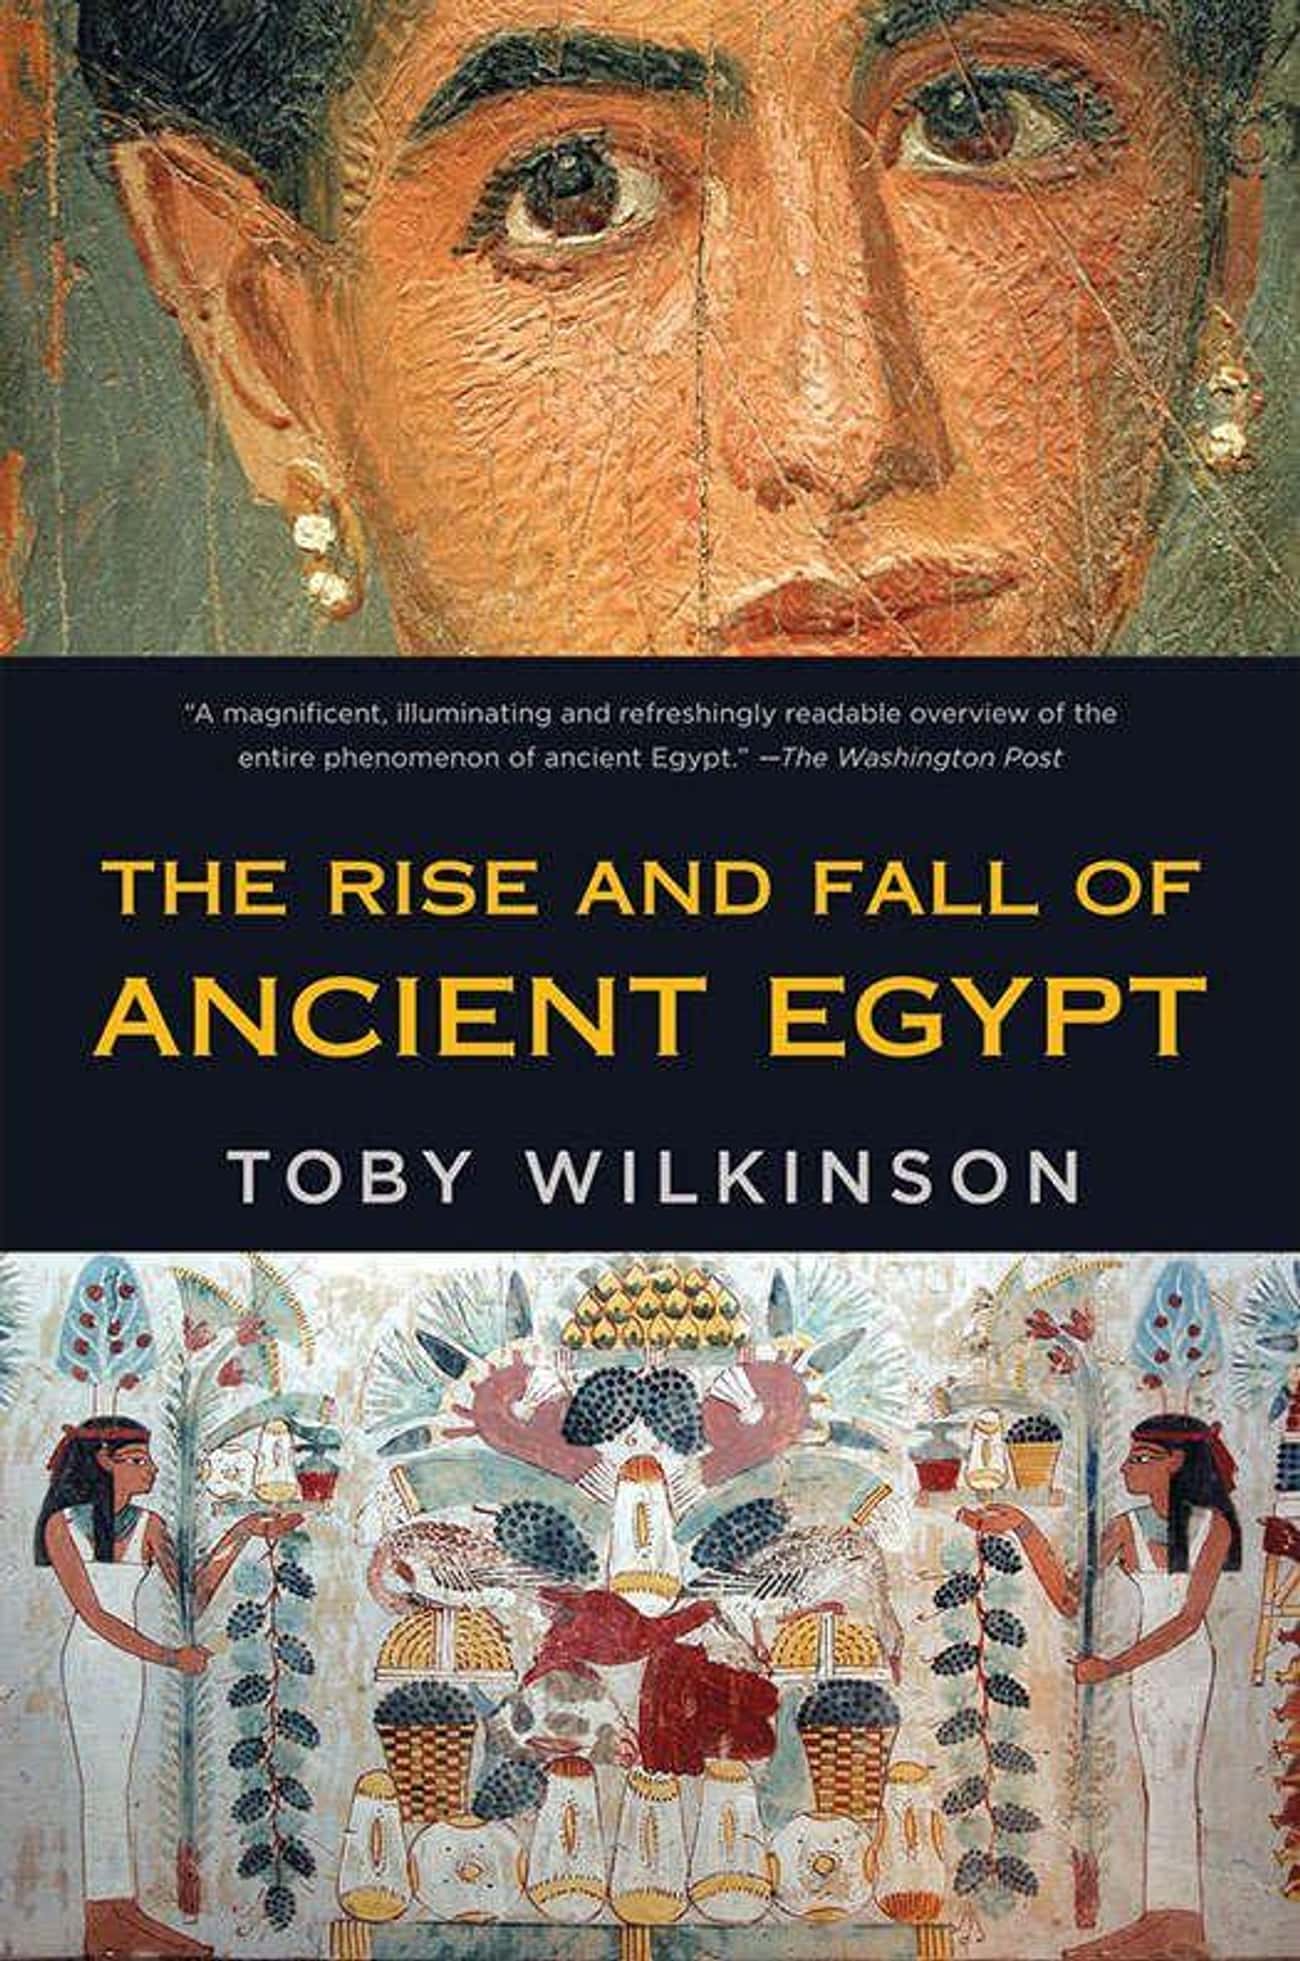 Want More Ancient Egypt?